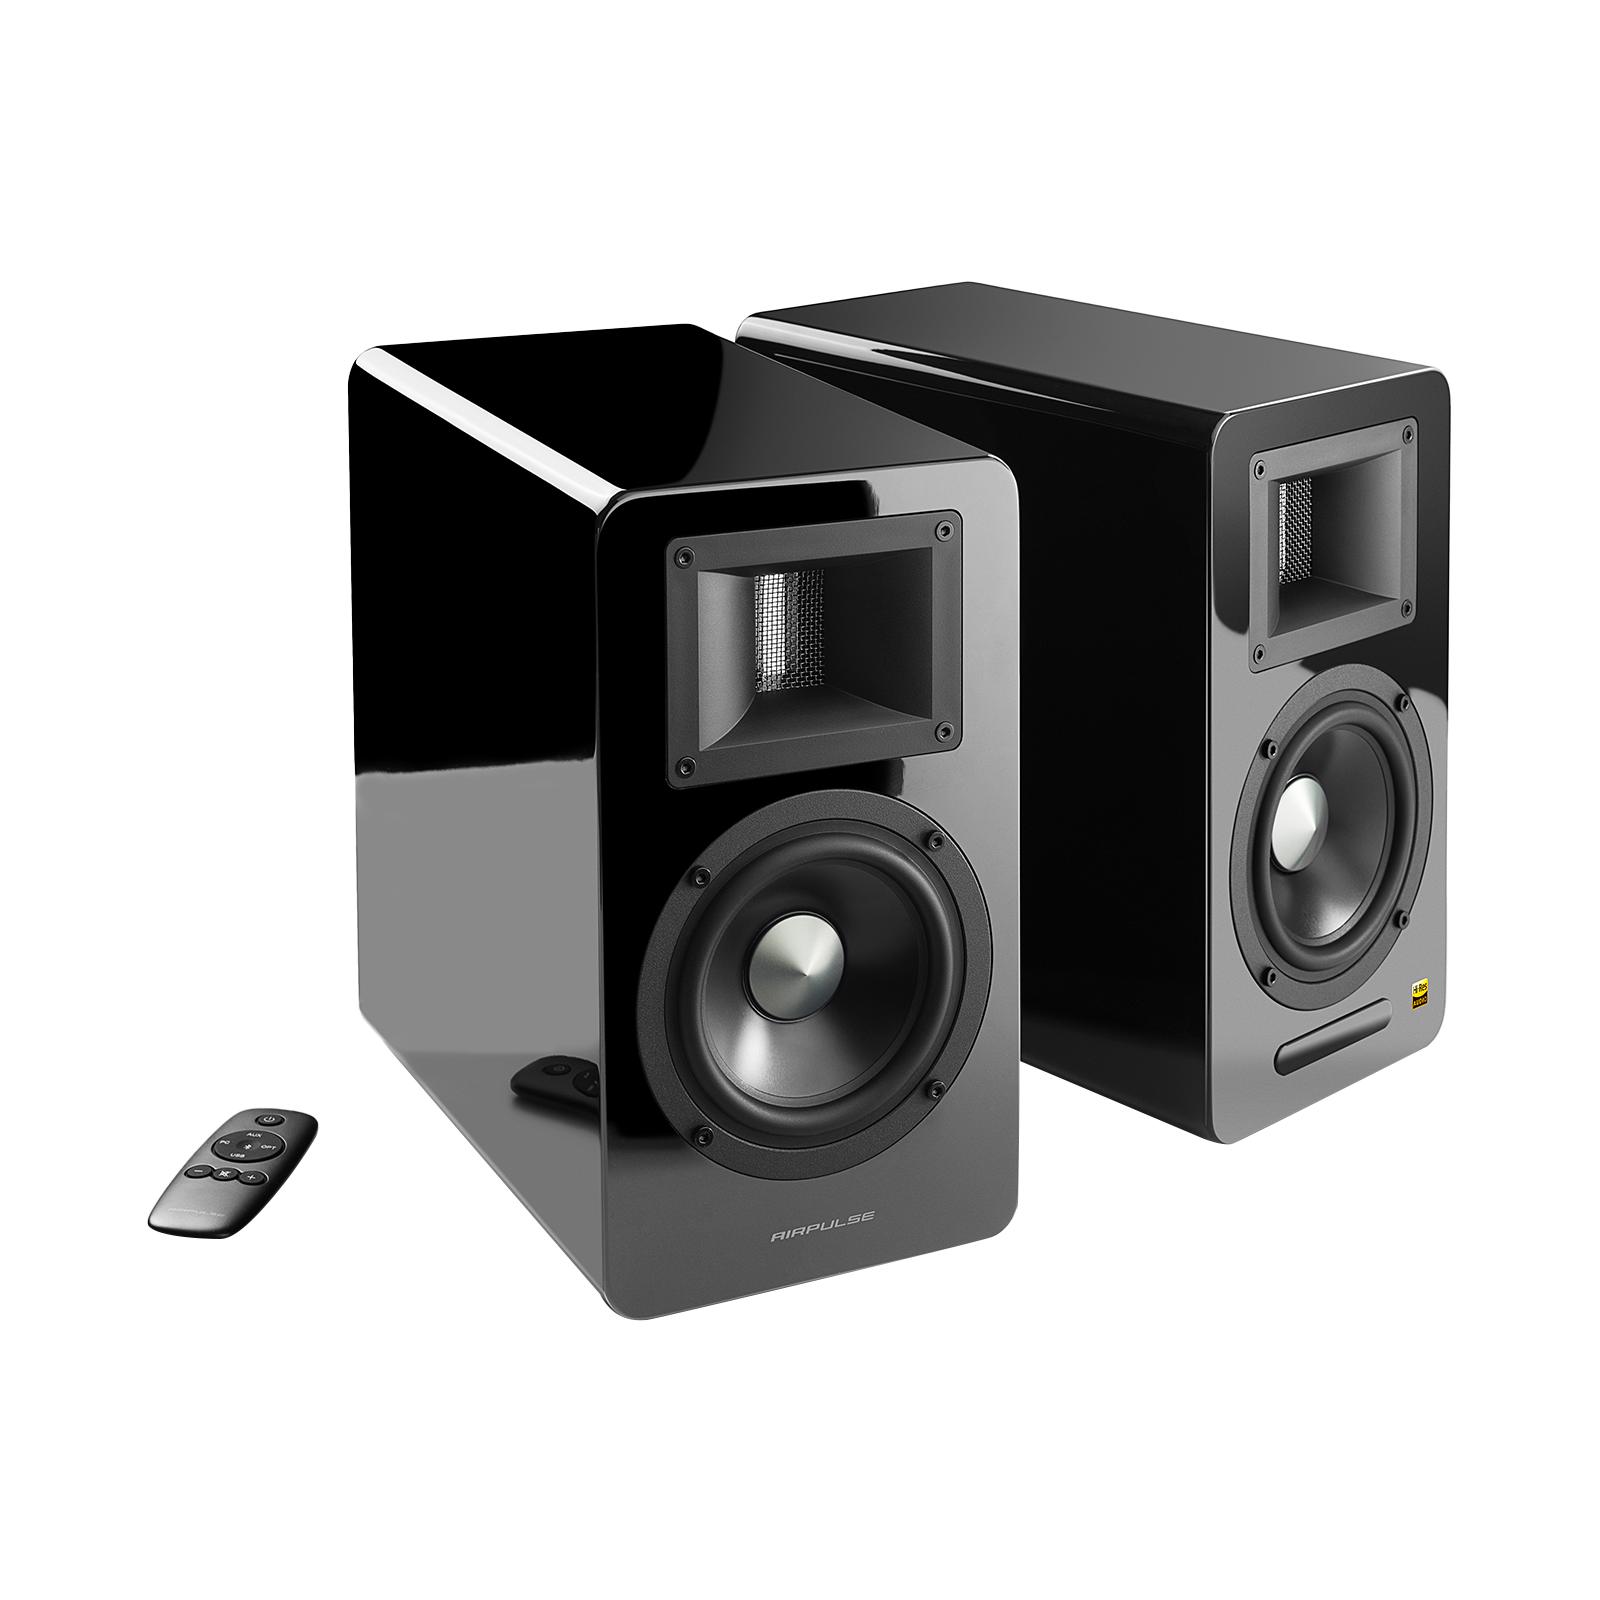 Airpulse A100 Hi-Res Active Speaker System